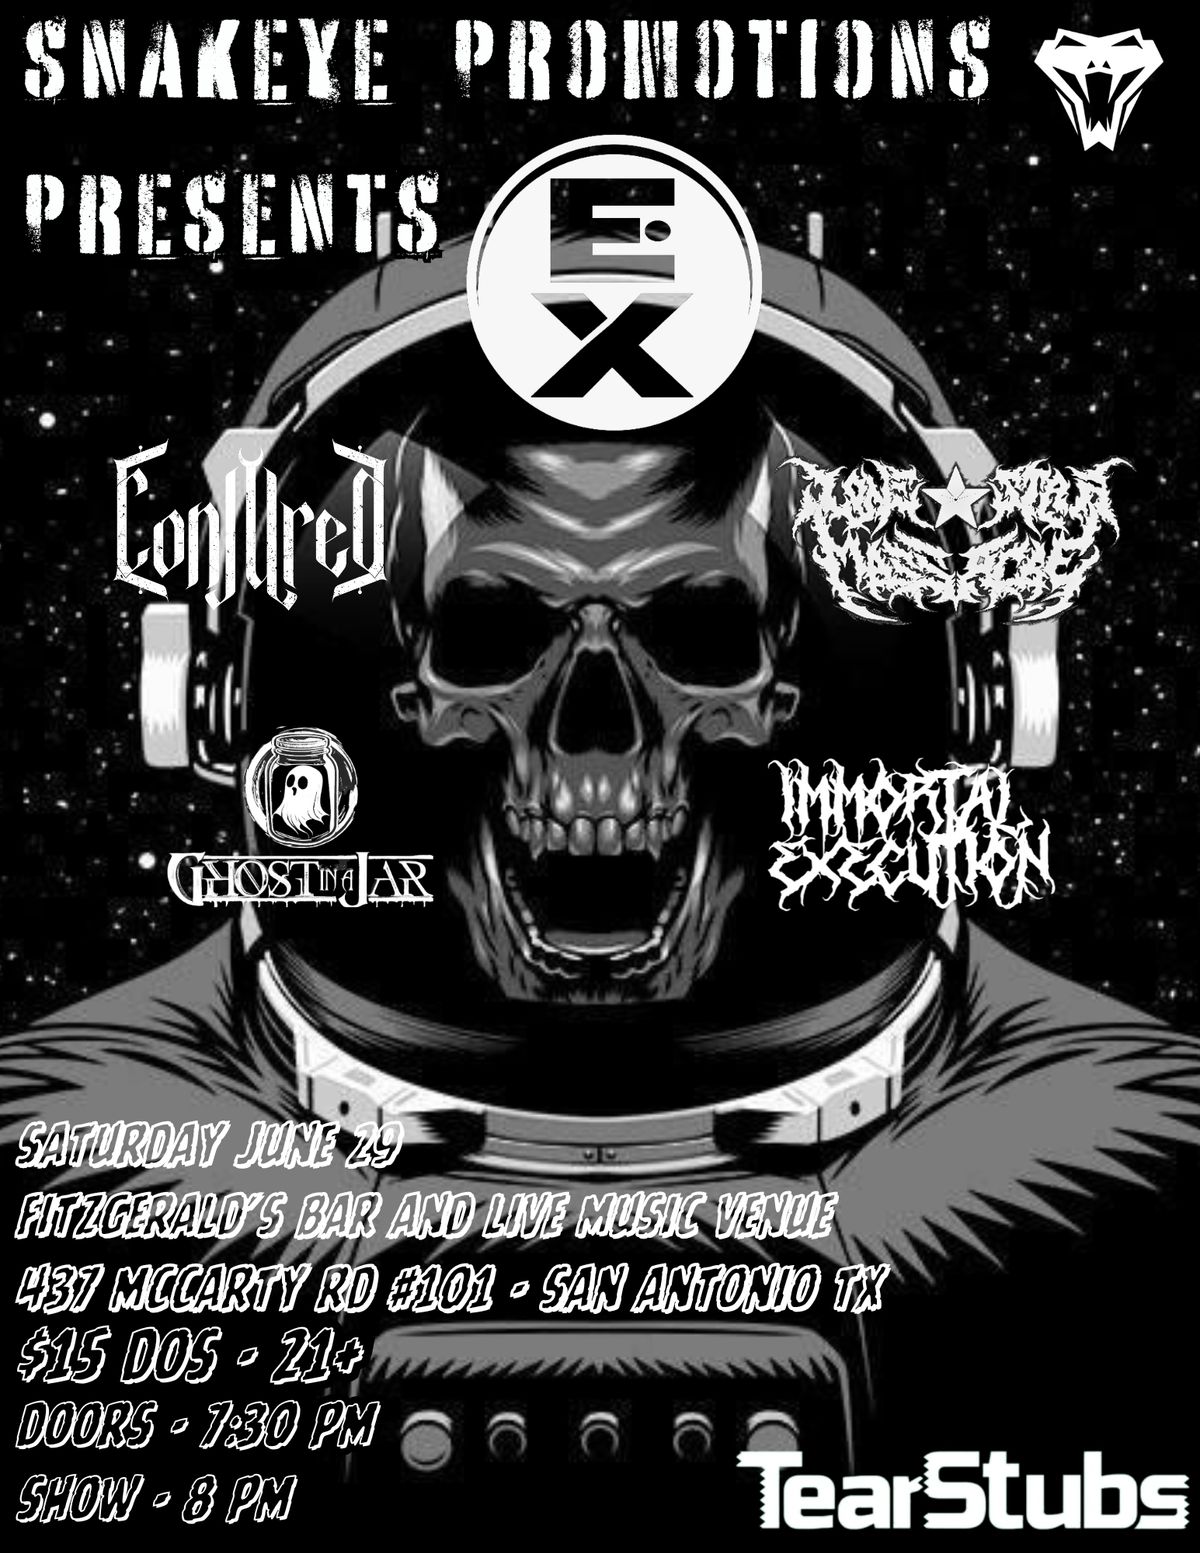 EXCODEX, CONJURED, LONESTAR MASSACRE, IMMORTAL EXECUTION, & GHOST IN A JAR